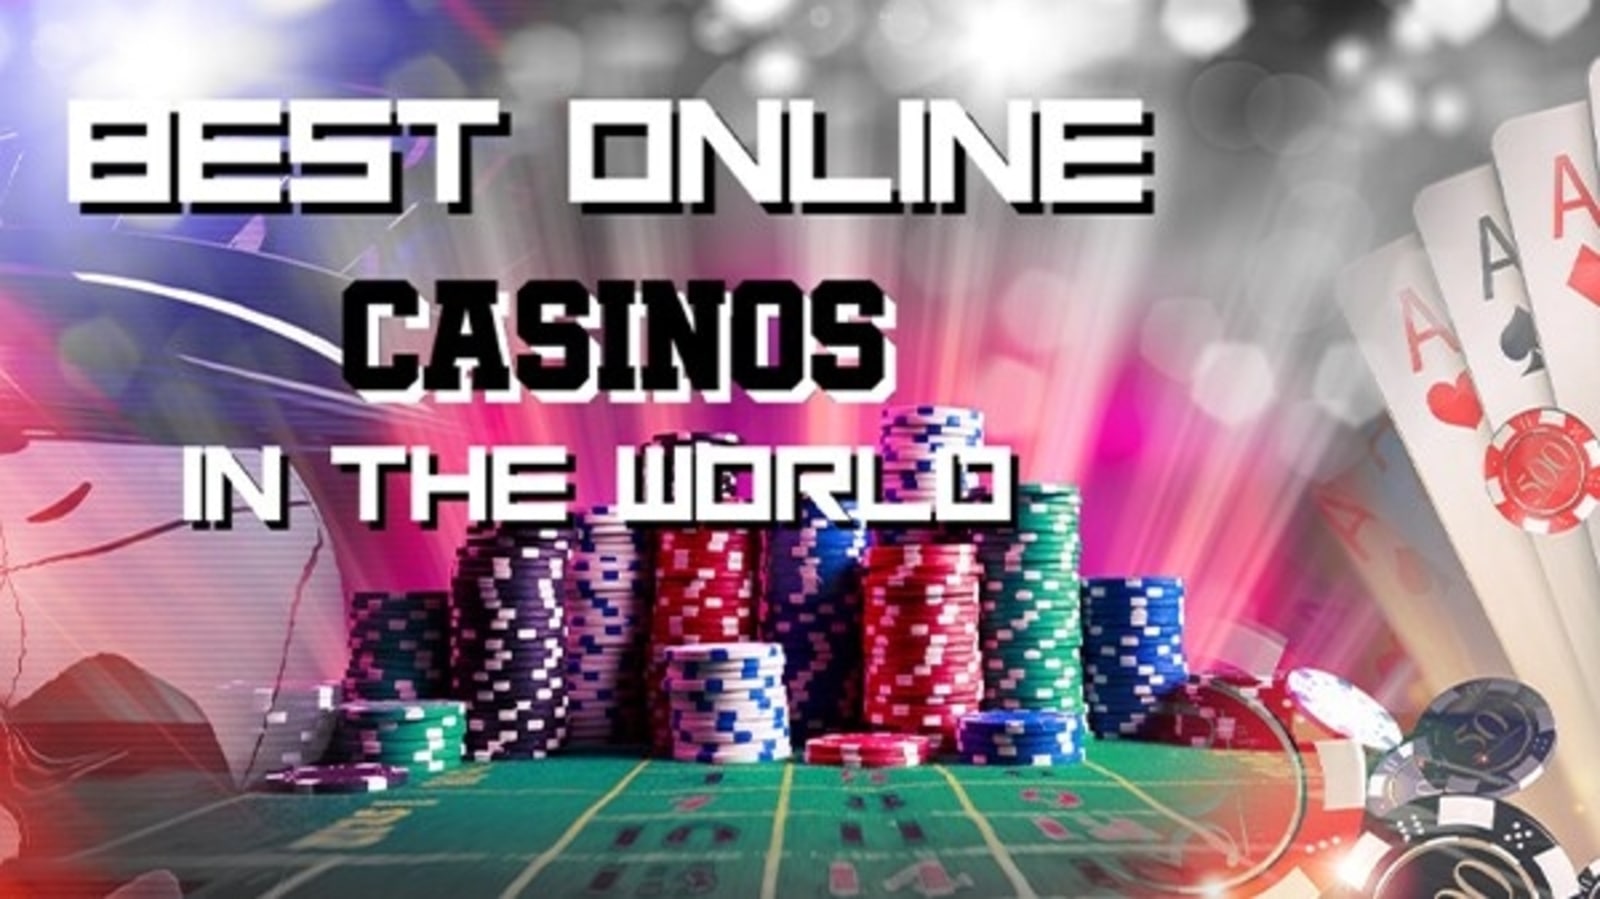 Photo: how many live casinos are there